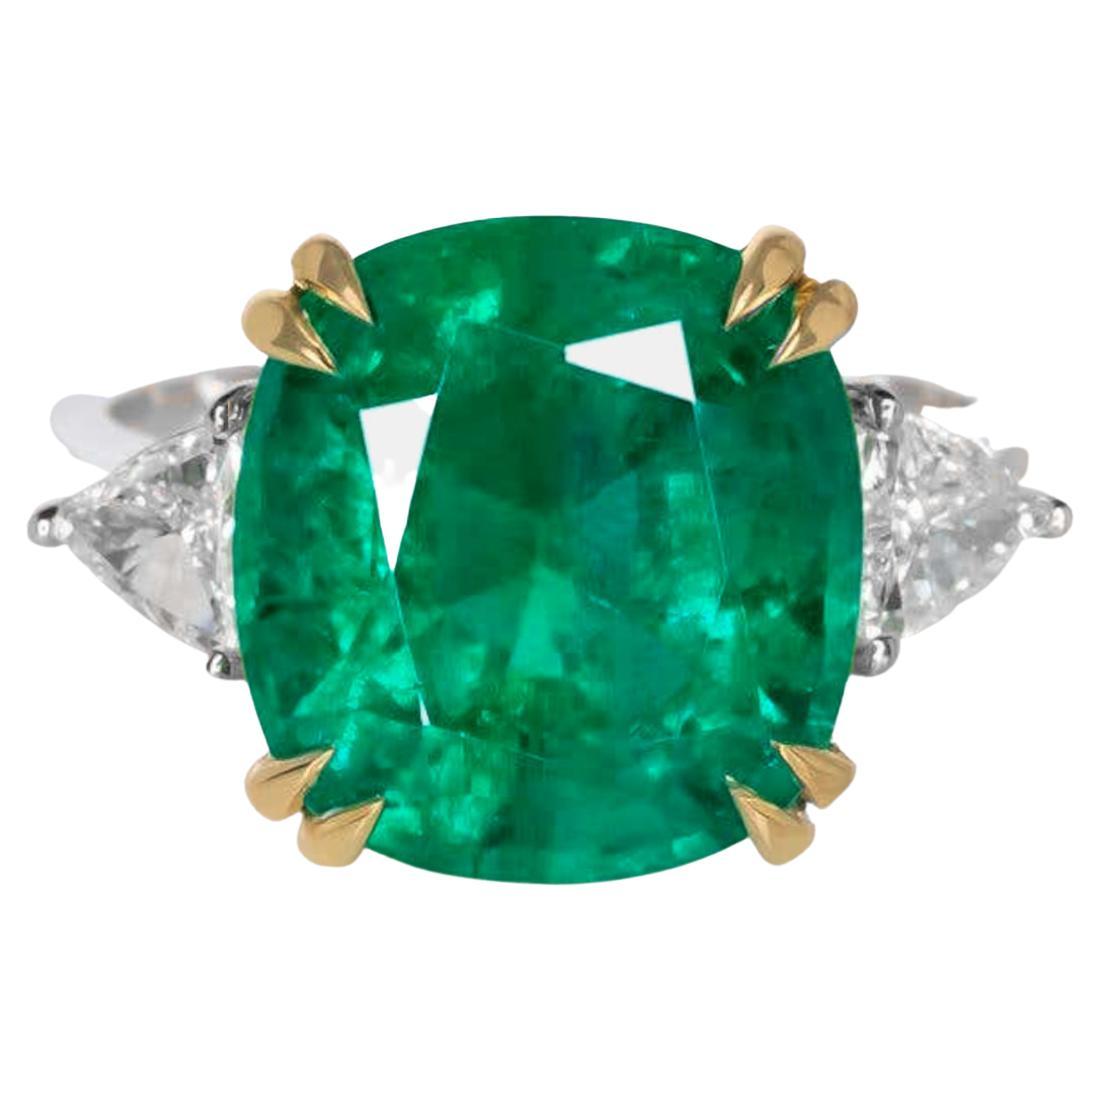 An extraordinary 6.60 carat cushion cut emerald certified by GIA, accompained by two trillion cut diamonds and set in solid 18Kt gold.
The handmade setting has been made in 18 carat yellow gold to enhance the beauty of this green-grass perfect